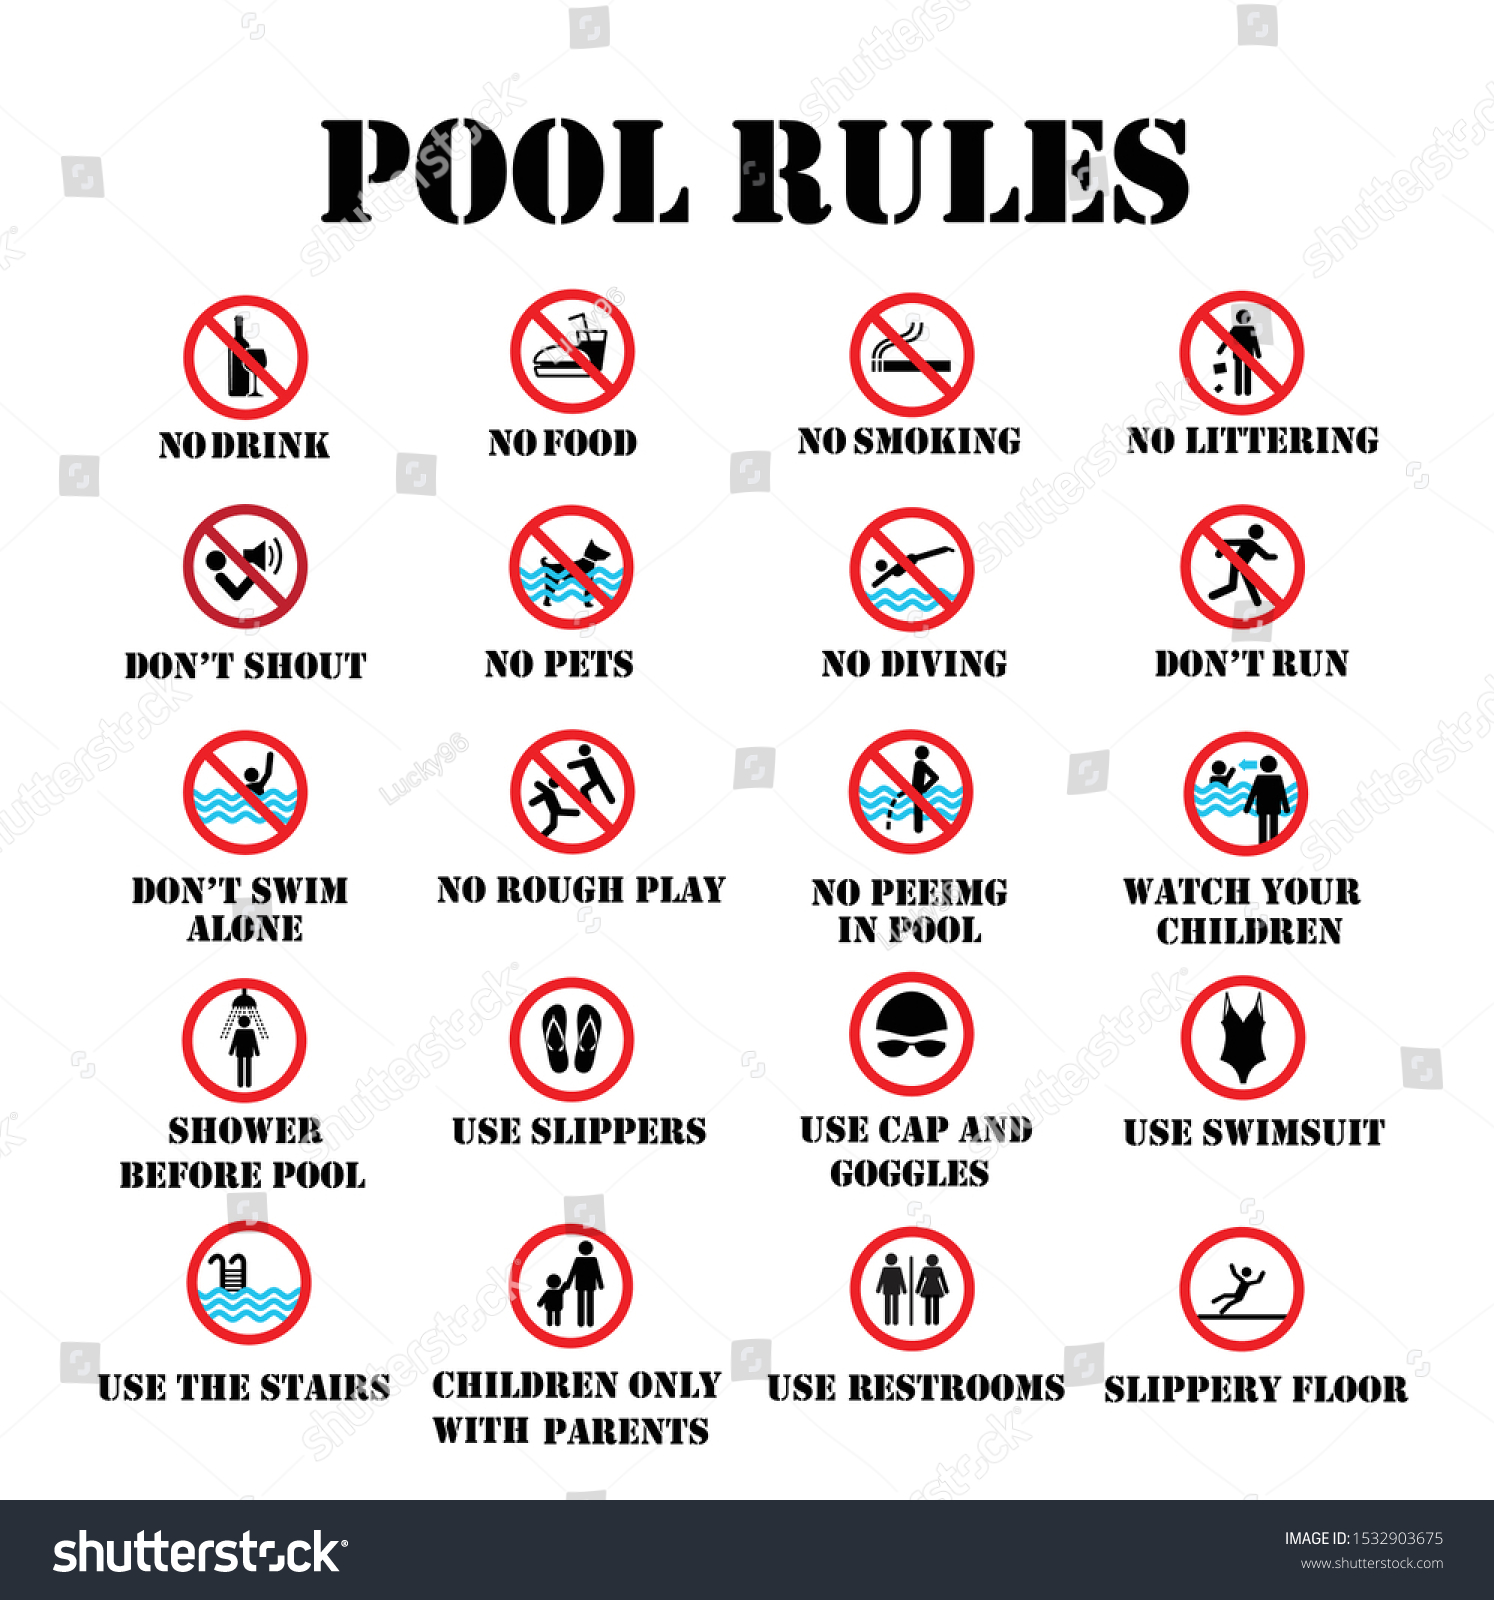 Stock Vector Swimming Pool Rules Public And Private Pools Rules To Ensure Health Safety And To Provide 1532903675 